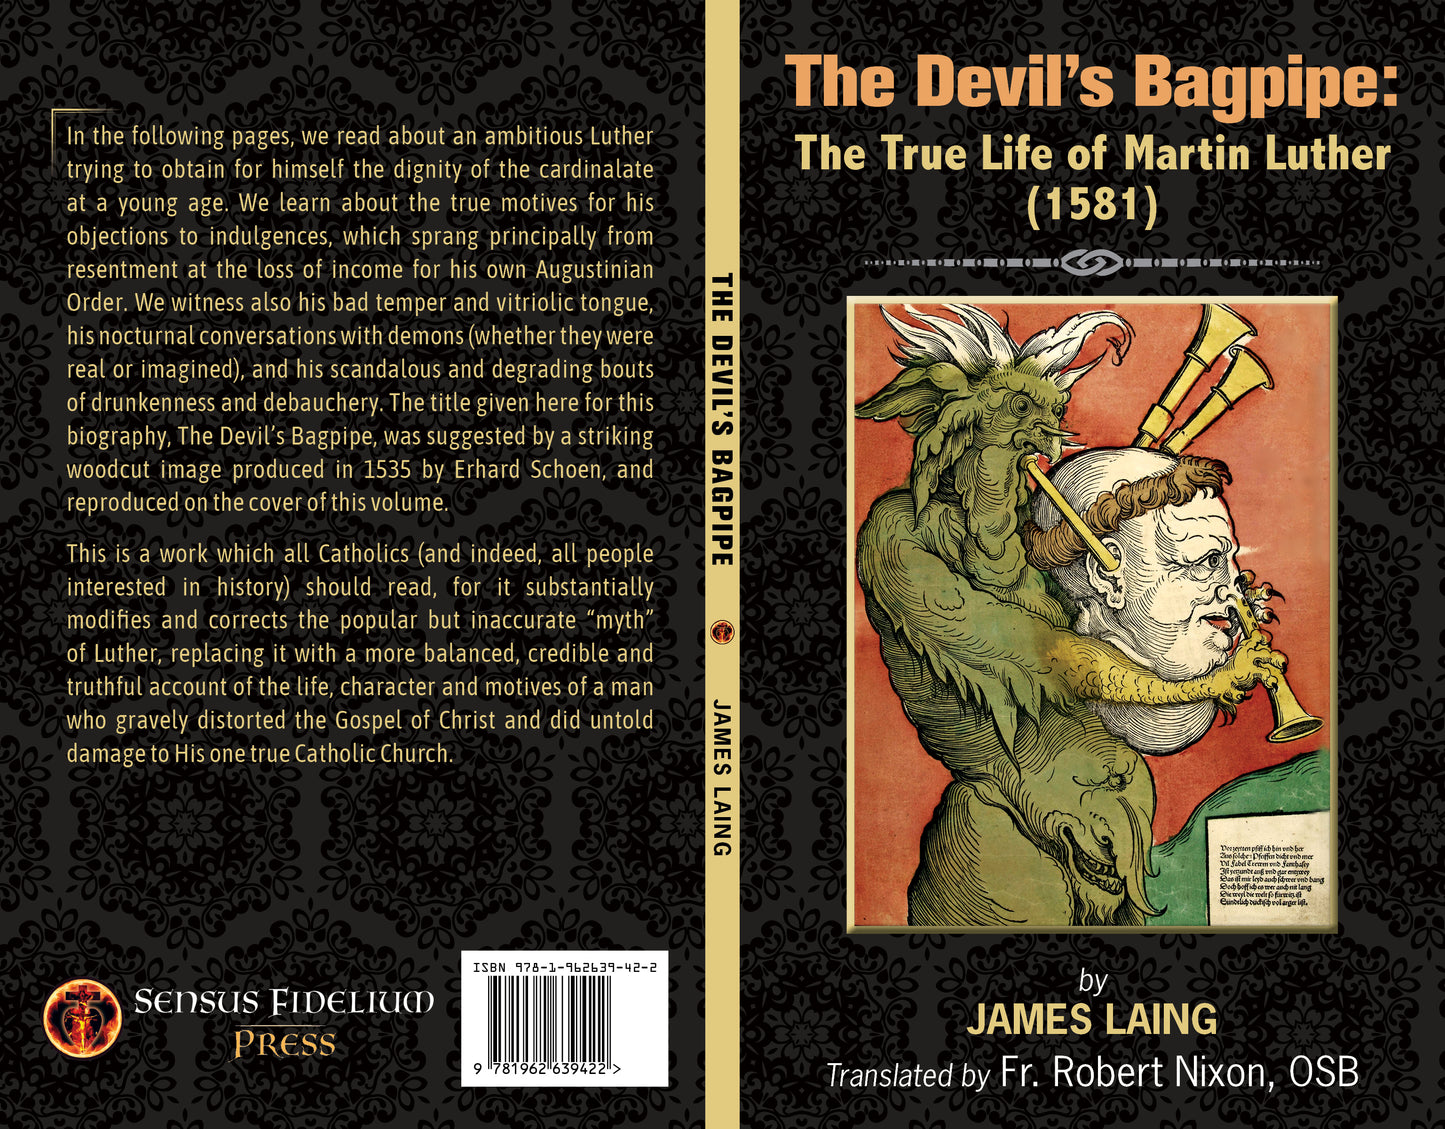 The Devil's Bagpipe: The True Life of Martin Luther